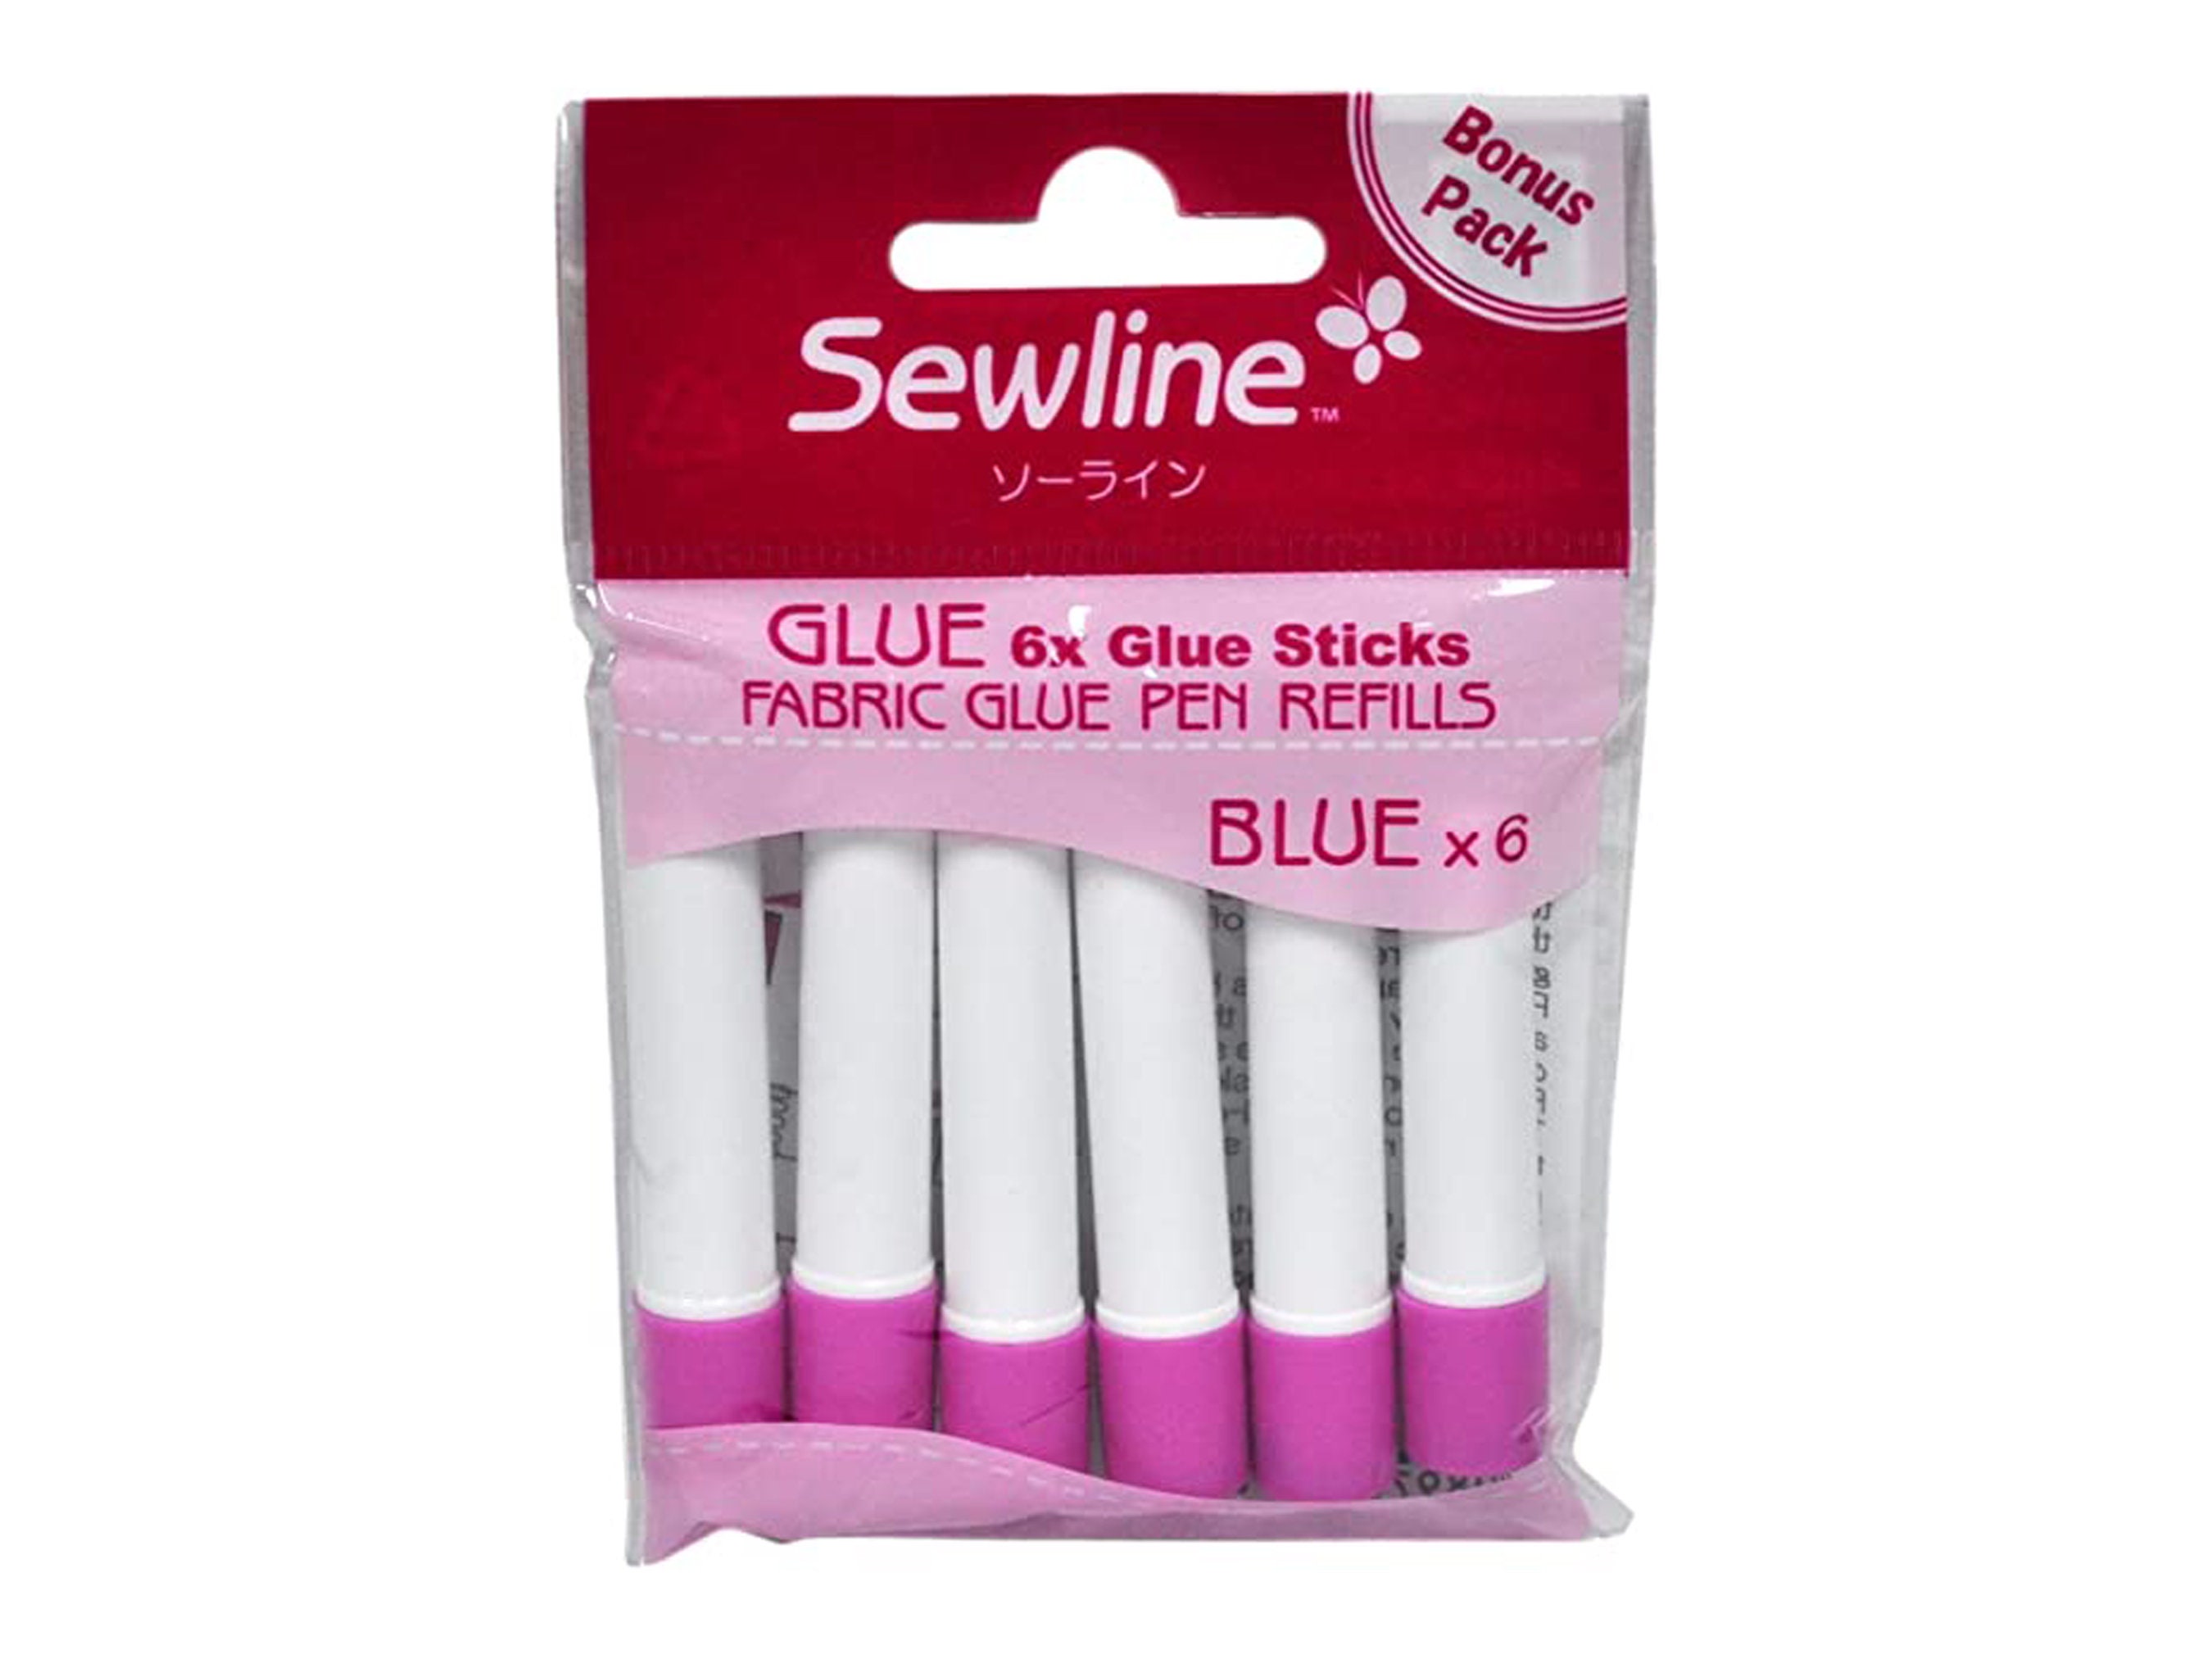 Special 10 Packs of 6 Blue Sewline Fabric Glue Pen Refill Pen Sold  Separately Link Below FAB50062 Glue Sticks 